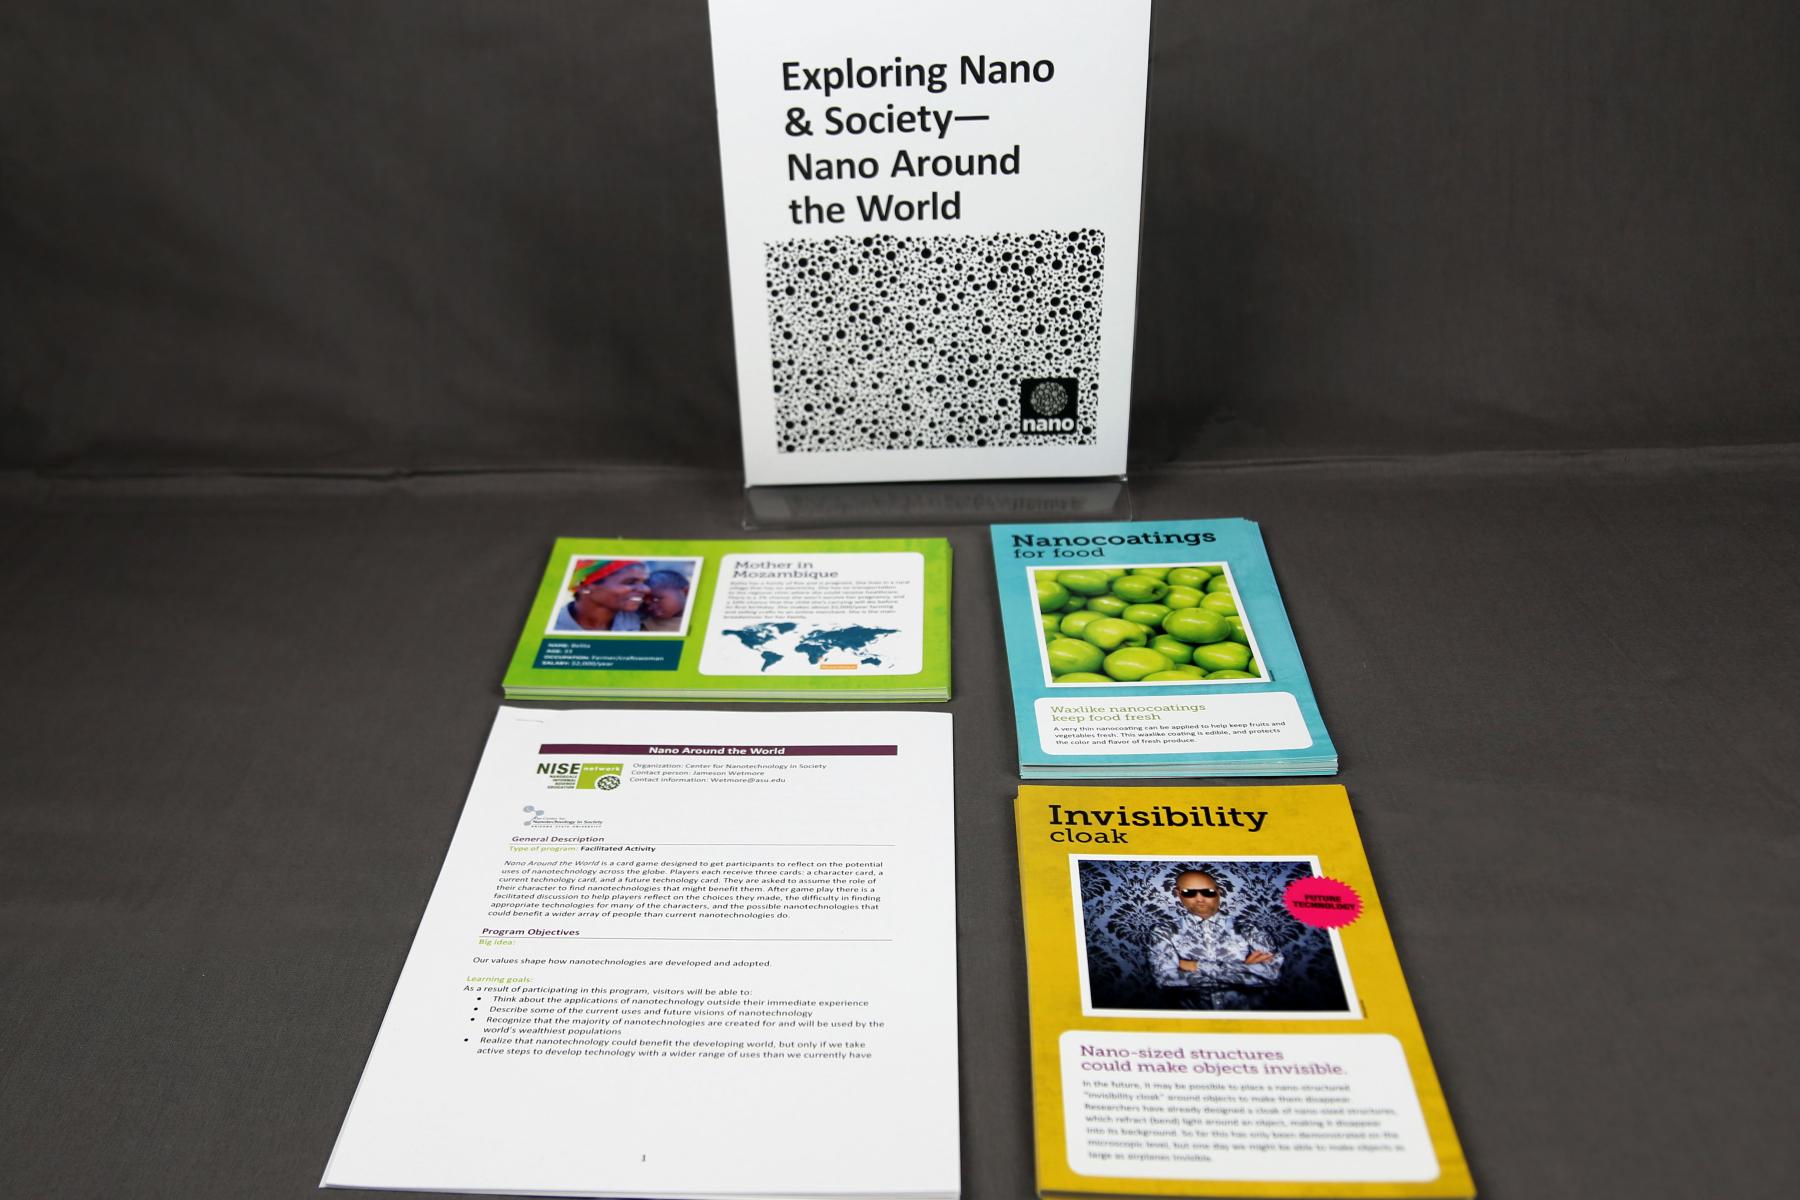 Nano Around The World  activity components including signs, activity materials and guides.